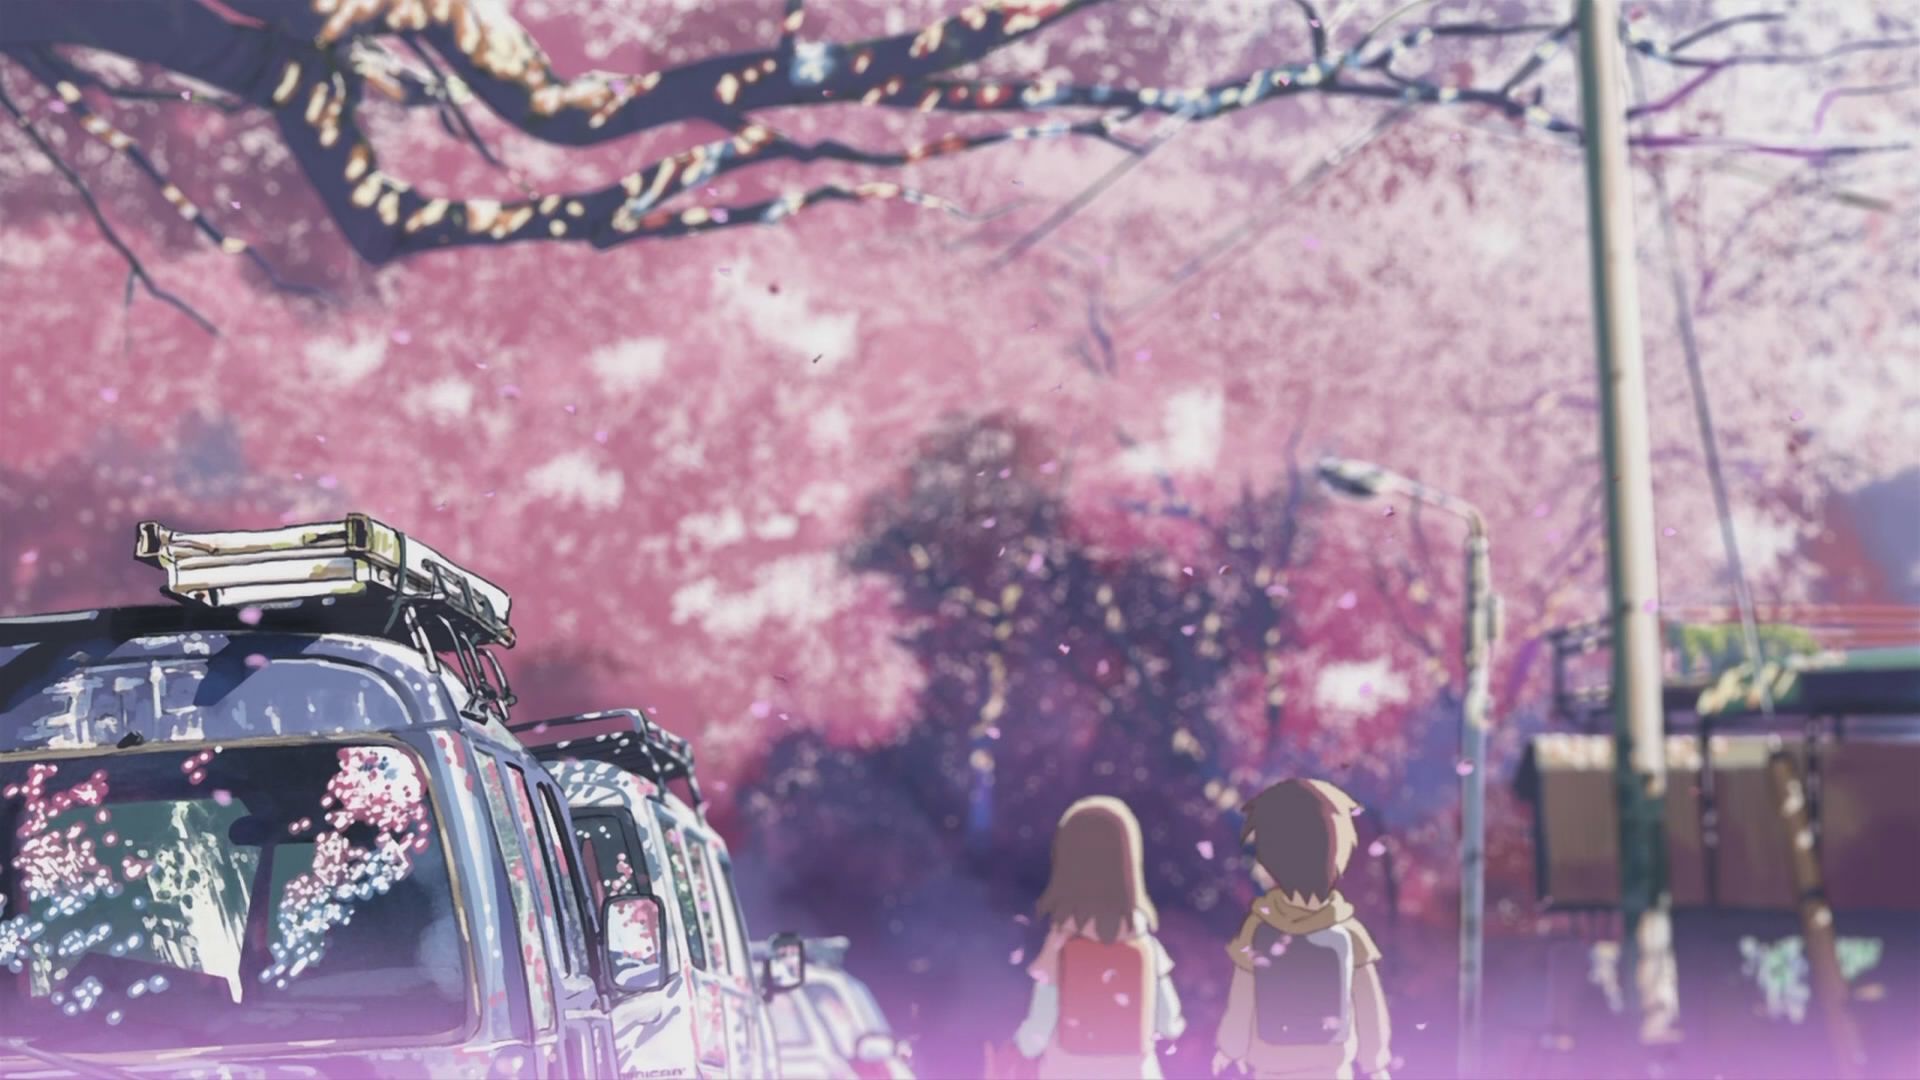 They say it's five centimeters per second. The speed at which the cherry blossoms fall.«. Anime wallpaper, Anime aesthetic wallpaper, Anime computer wallpaper